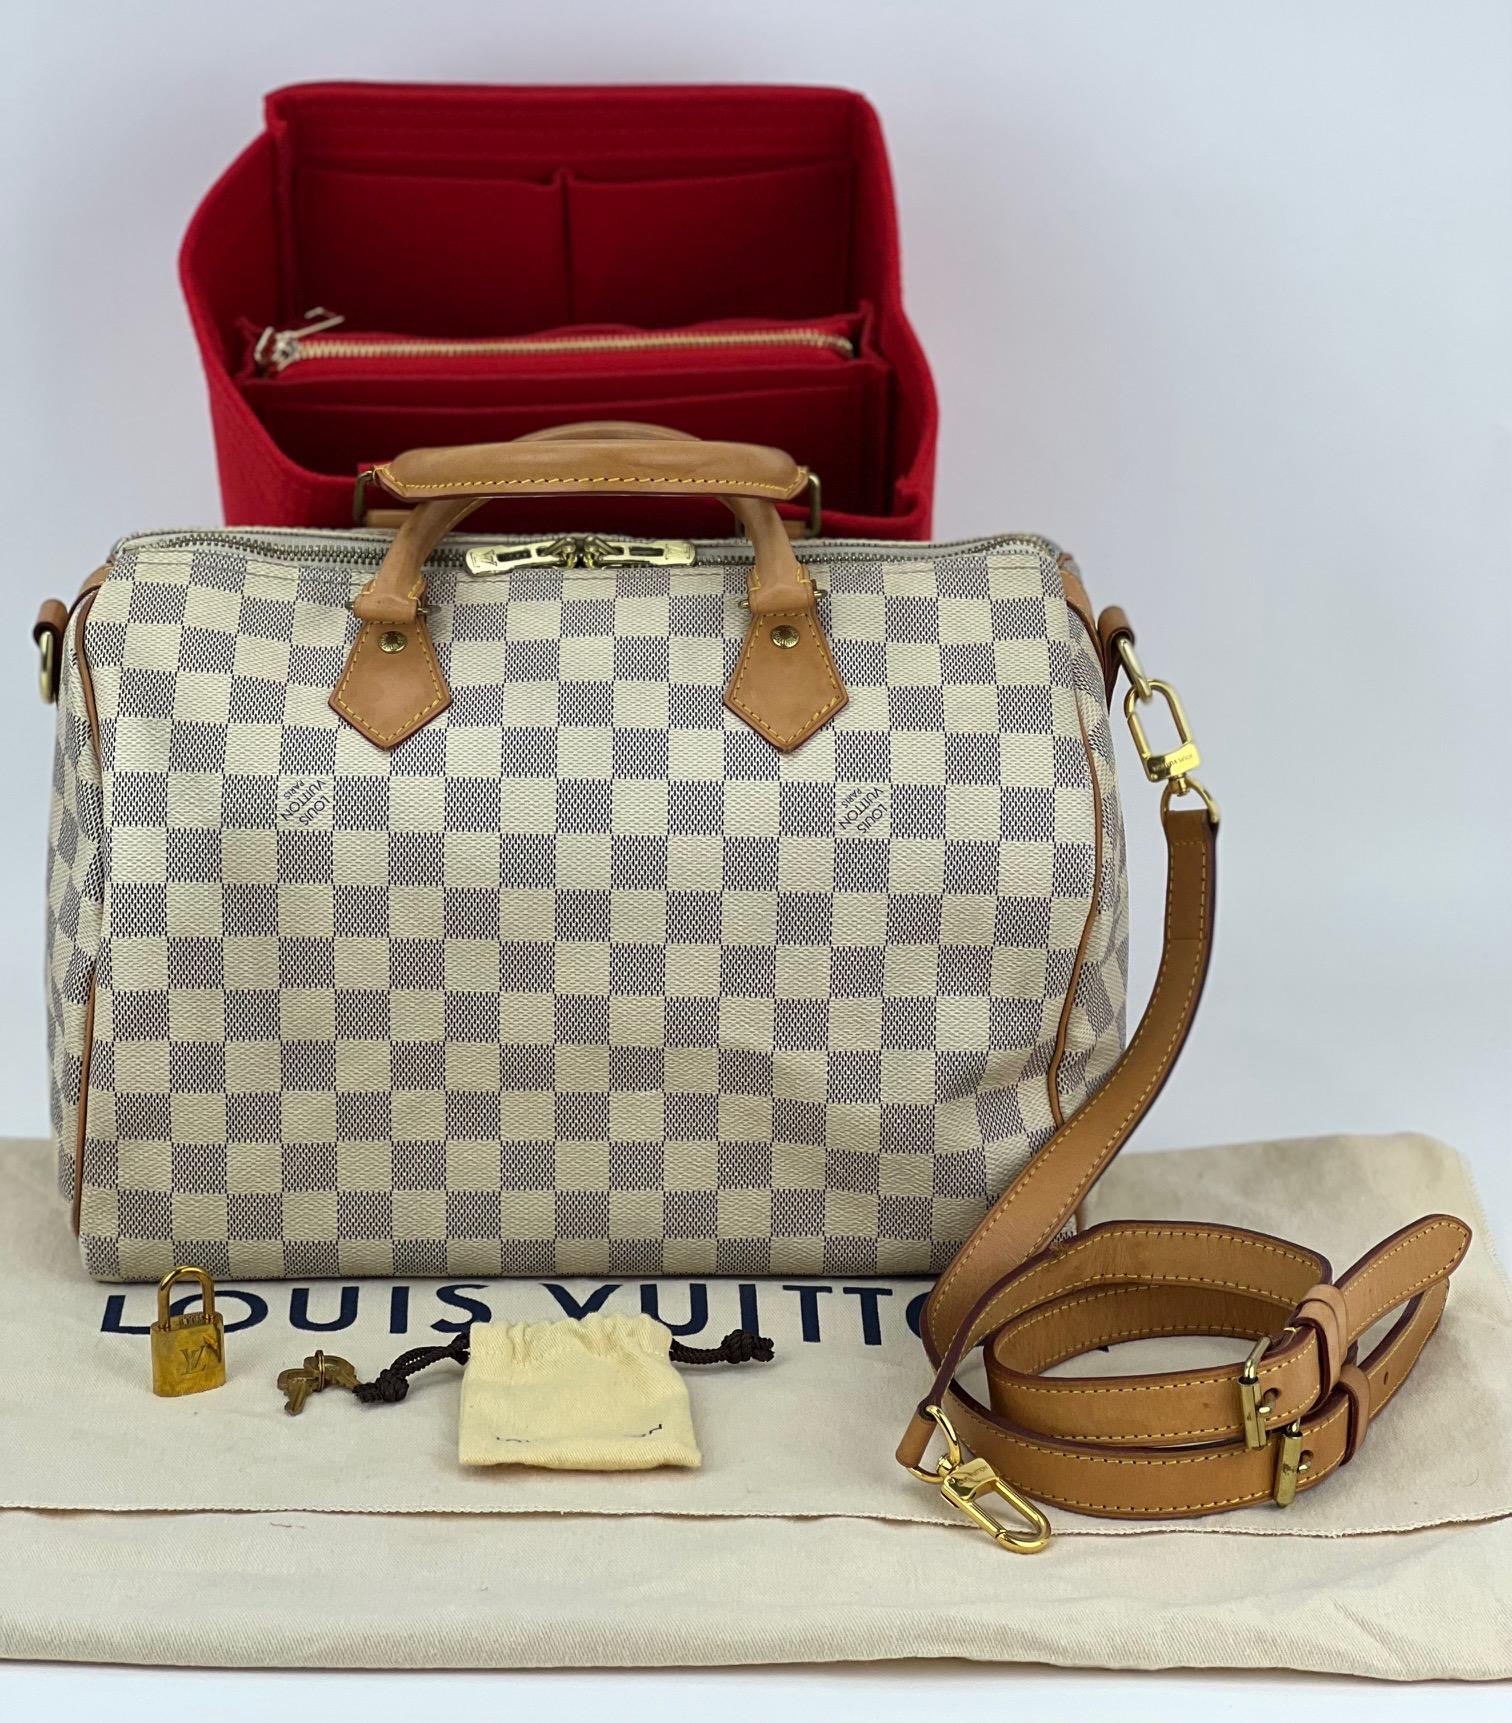 Pre-Owned  100% Authentic
Louis Vuitton damier Azur Speedy Bandouliere 30
W/added insert to help keep its shape and organize
RATING  B  very good, well maintained, shows 
minor signs of wear
MATERIAL: damier azur, leather trim
LEATHER TRIM: has some